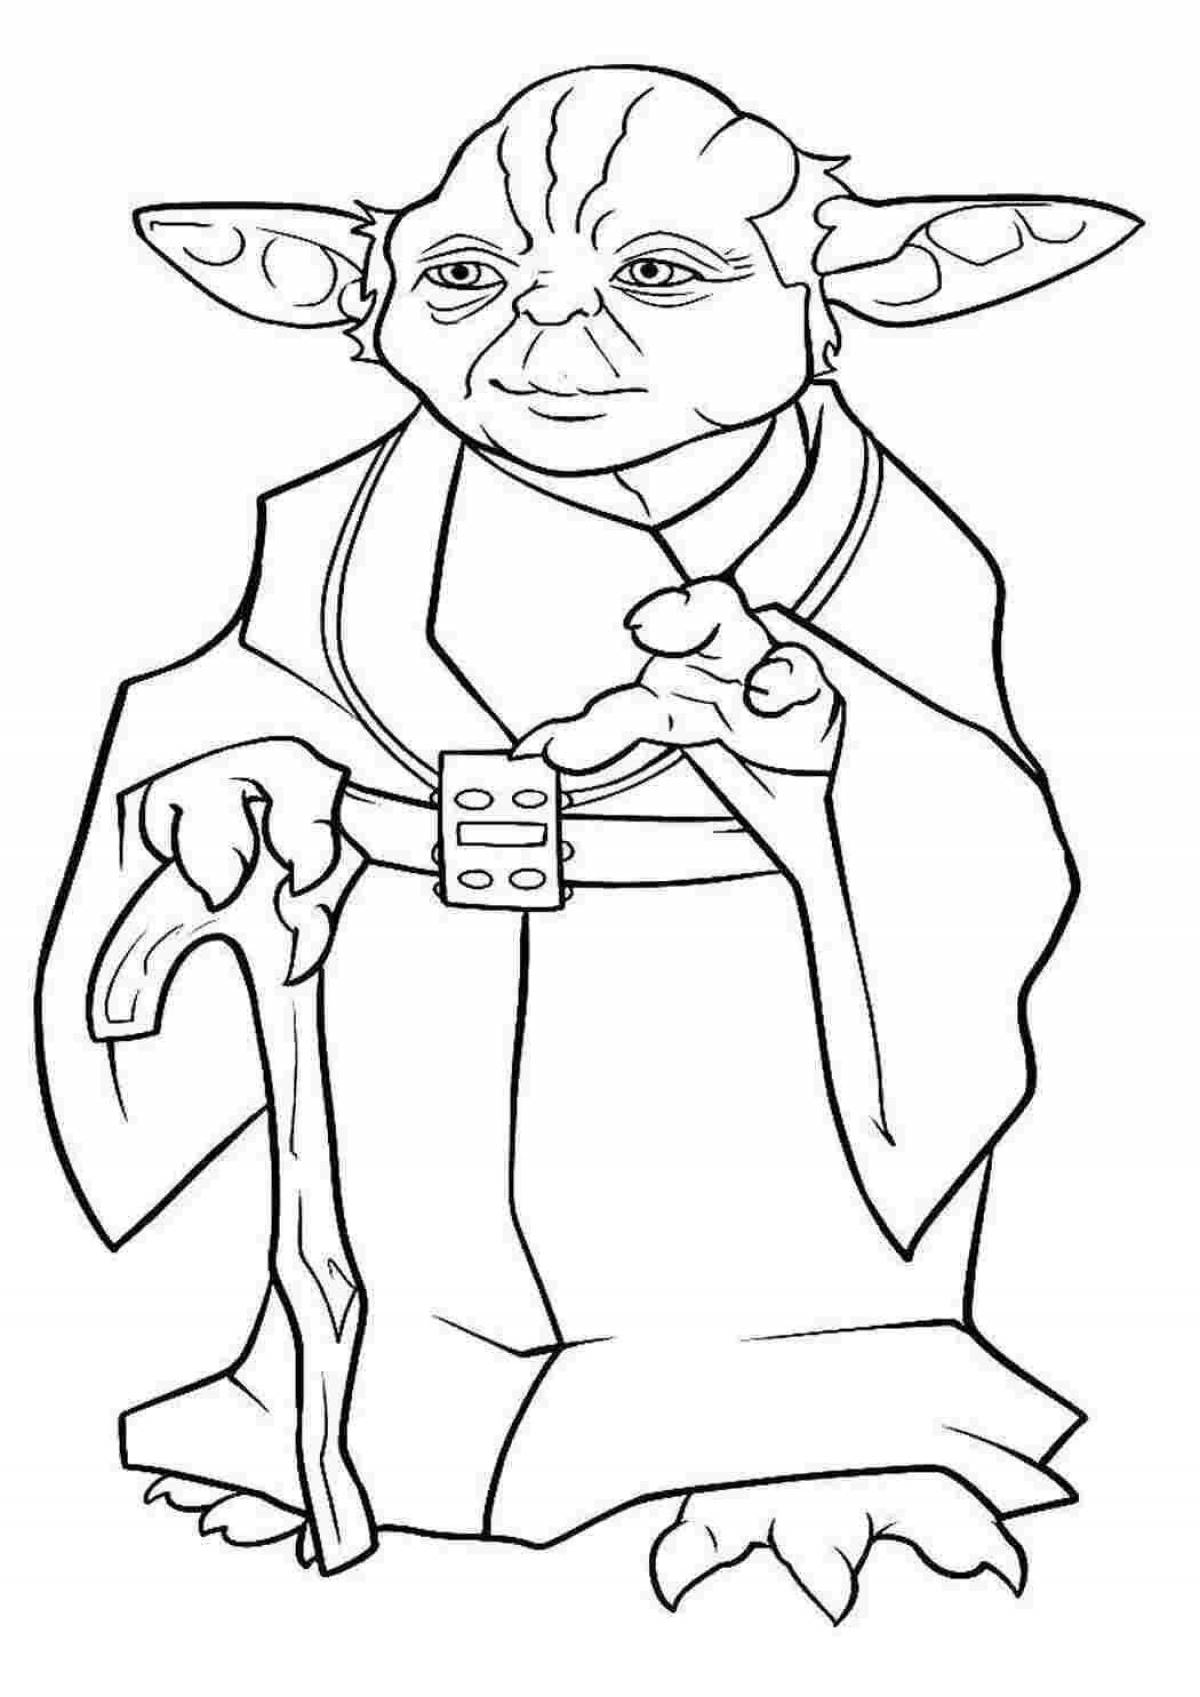 Large star wars coloring book for boys